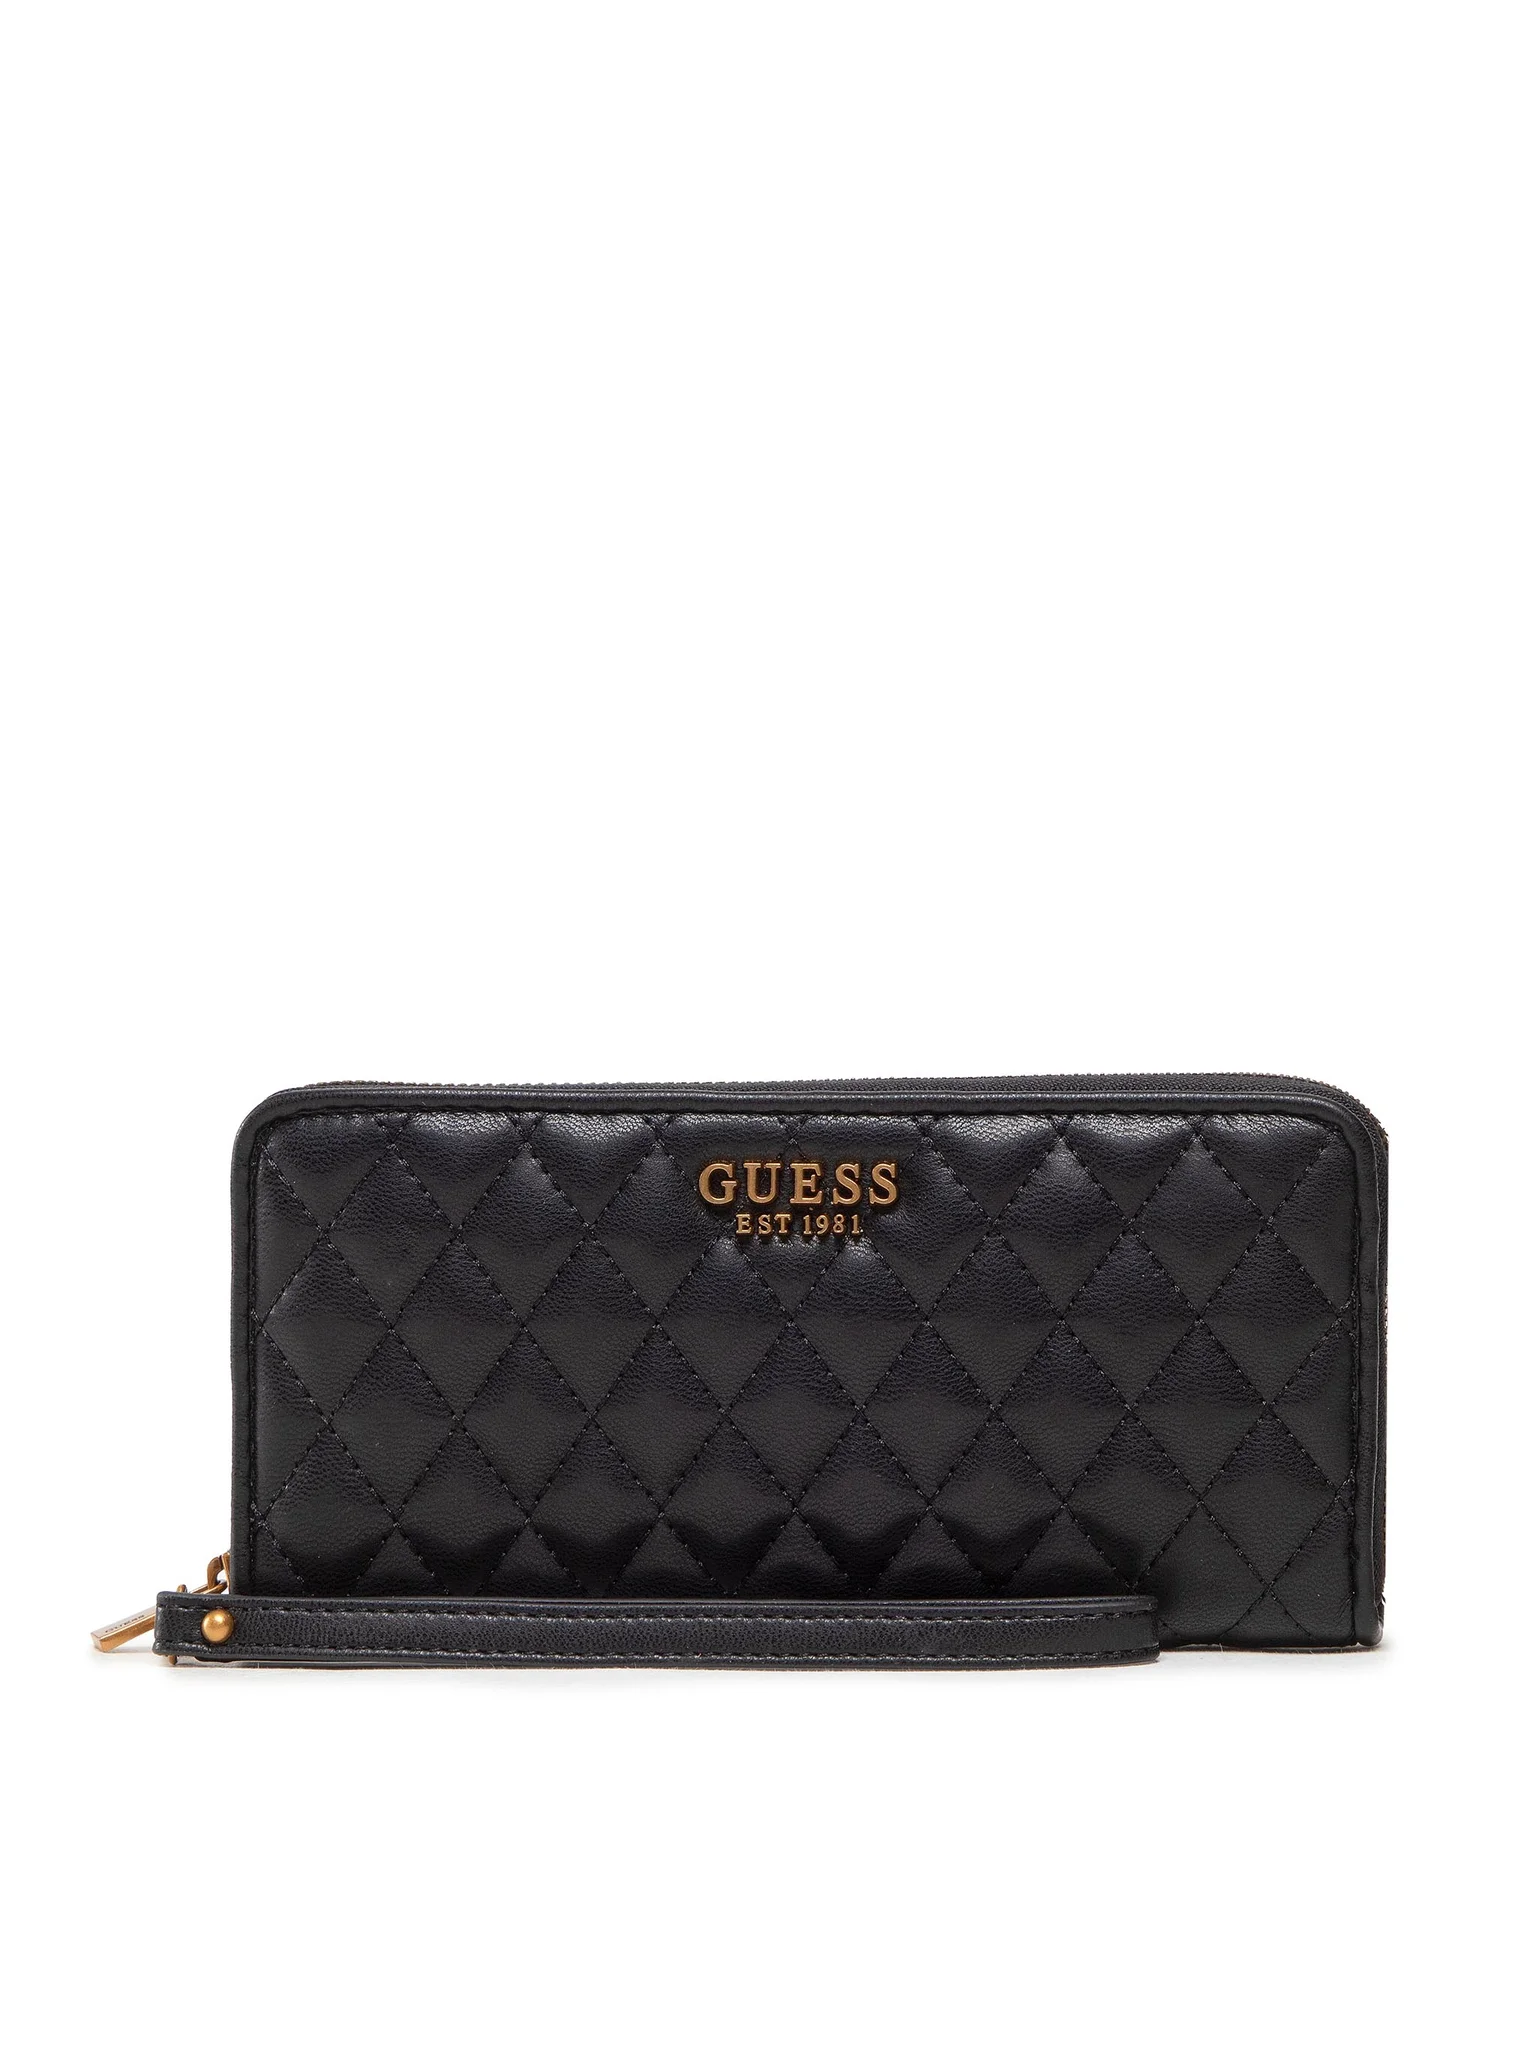 Guess MAILA SLG LARGE ZIP AROUND